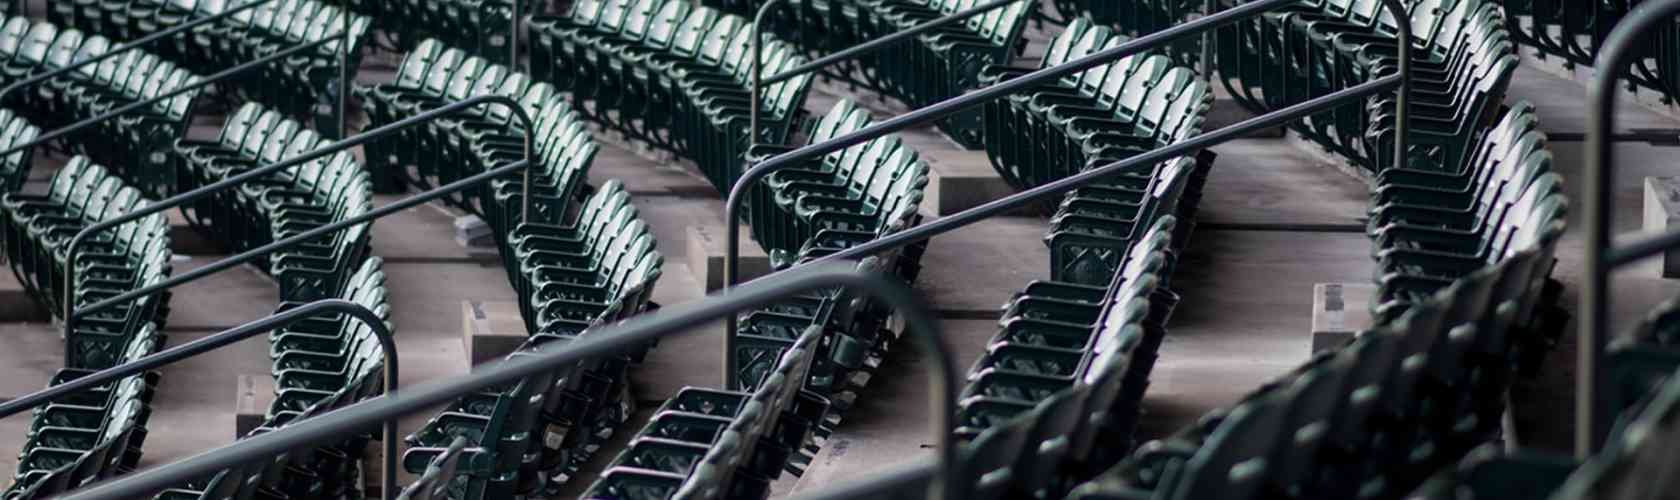 Rows of stadium chairs